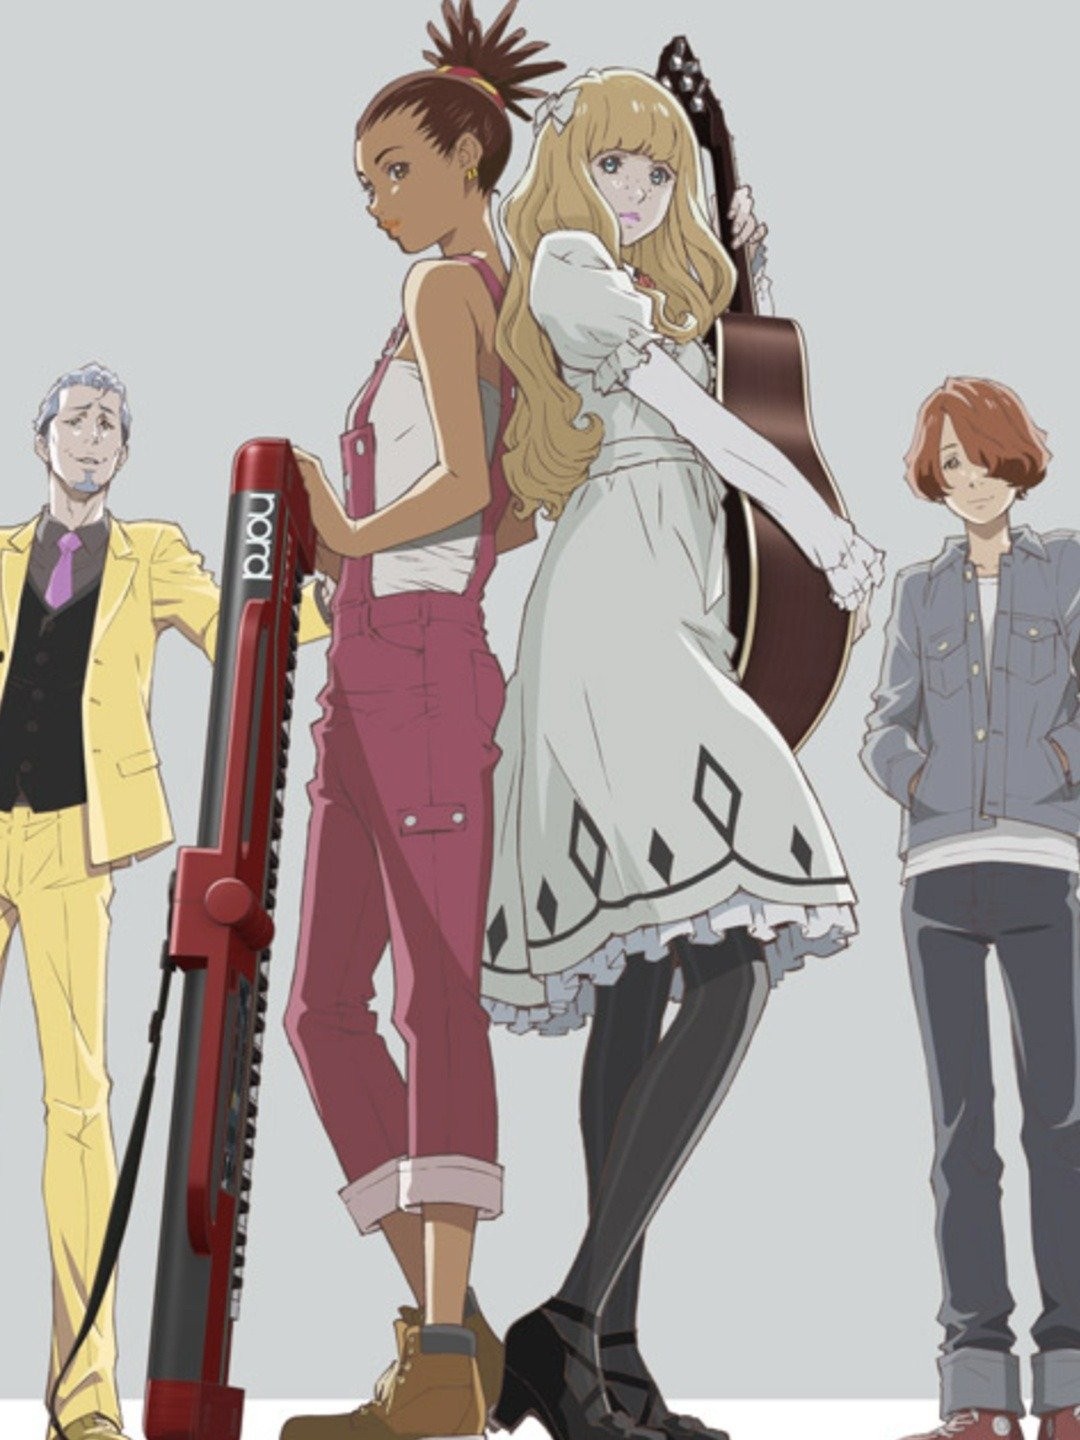 Carole & Tuesday: Best 10 Songs of Season 1, Ranked